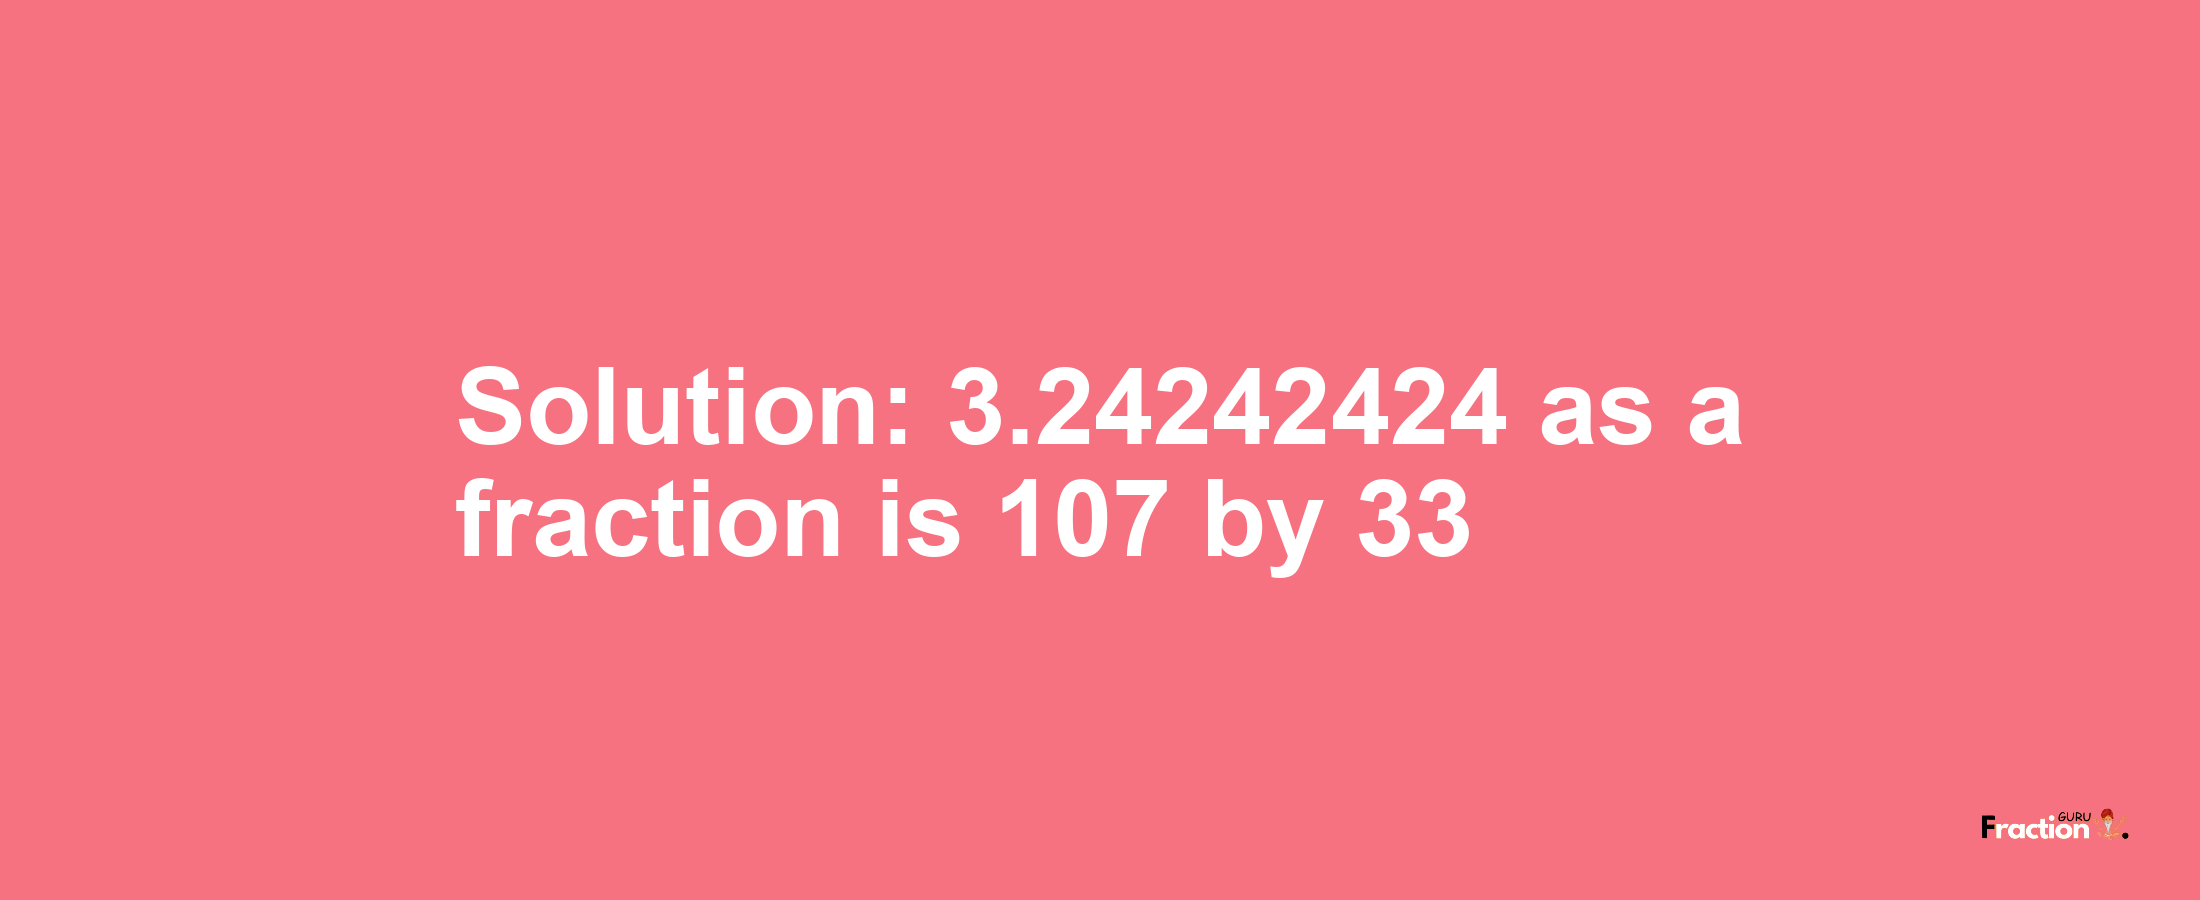 Solution:3.24242424 as a fraction is 107/33